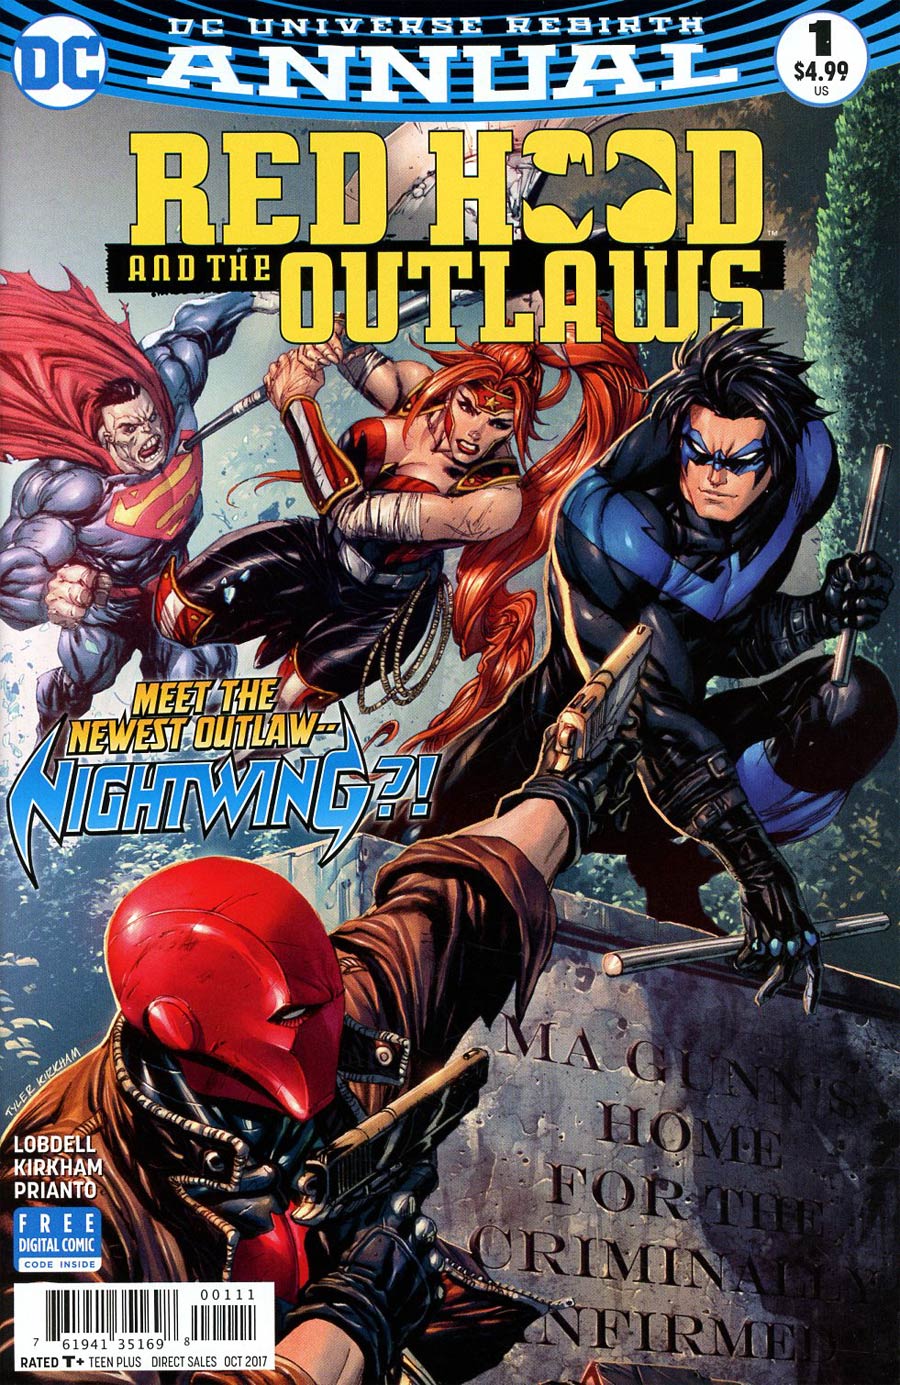 Red Hood And The Outlaws Vol 2 Annual #1